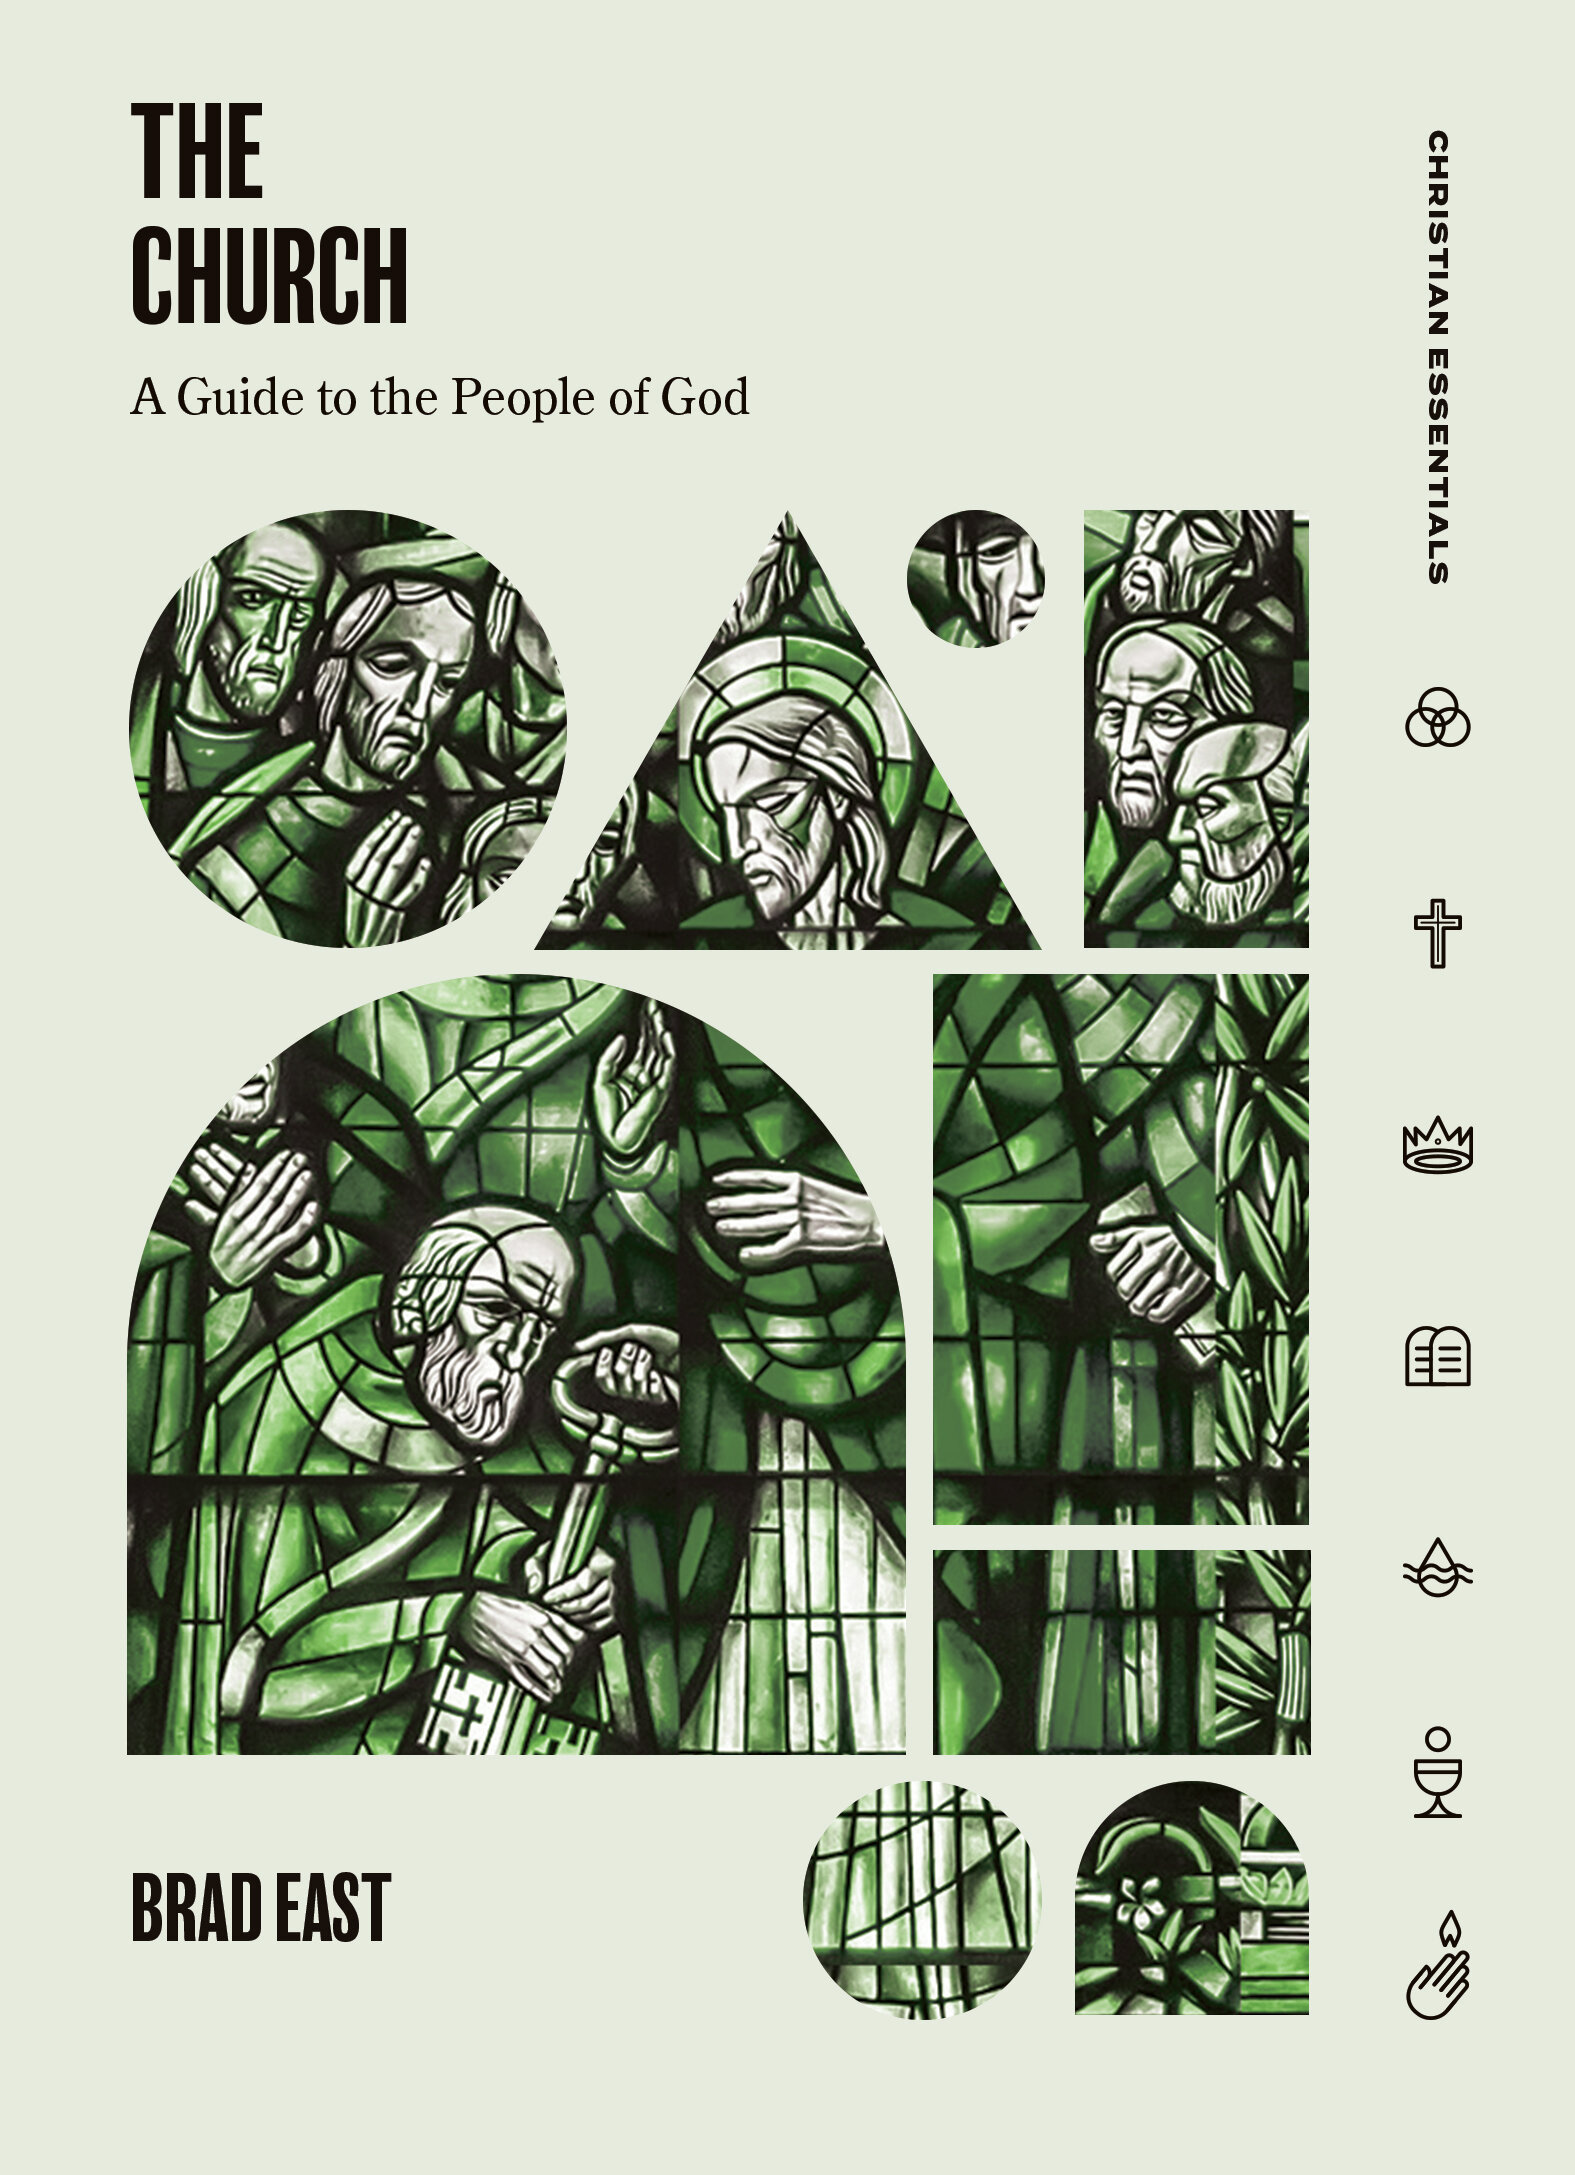 The Church: A Guide to the People of God